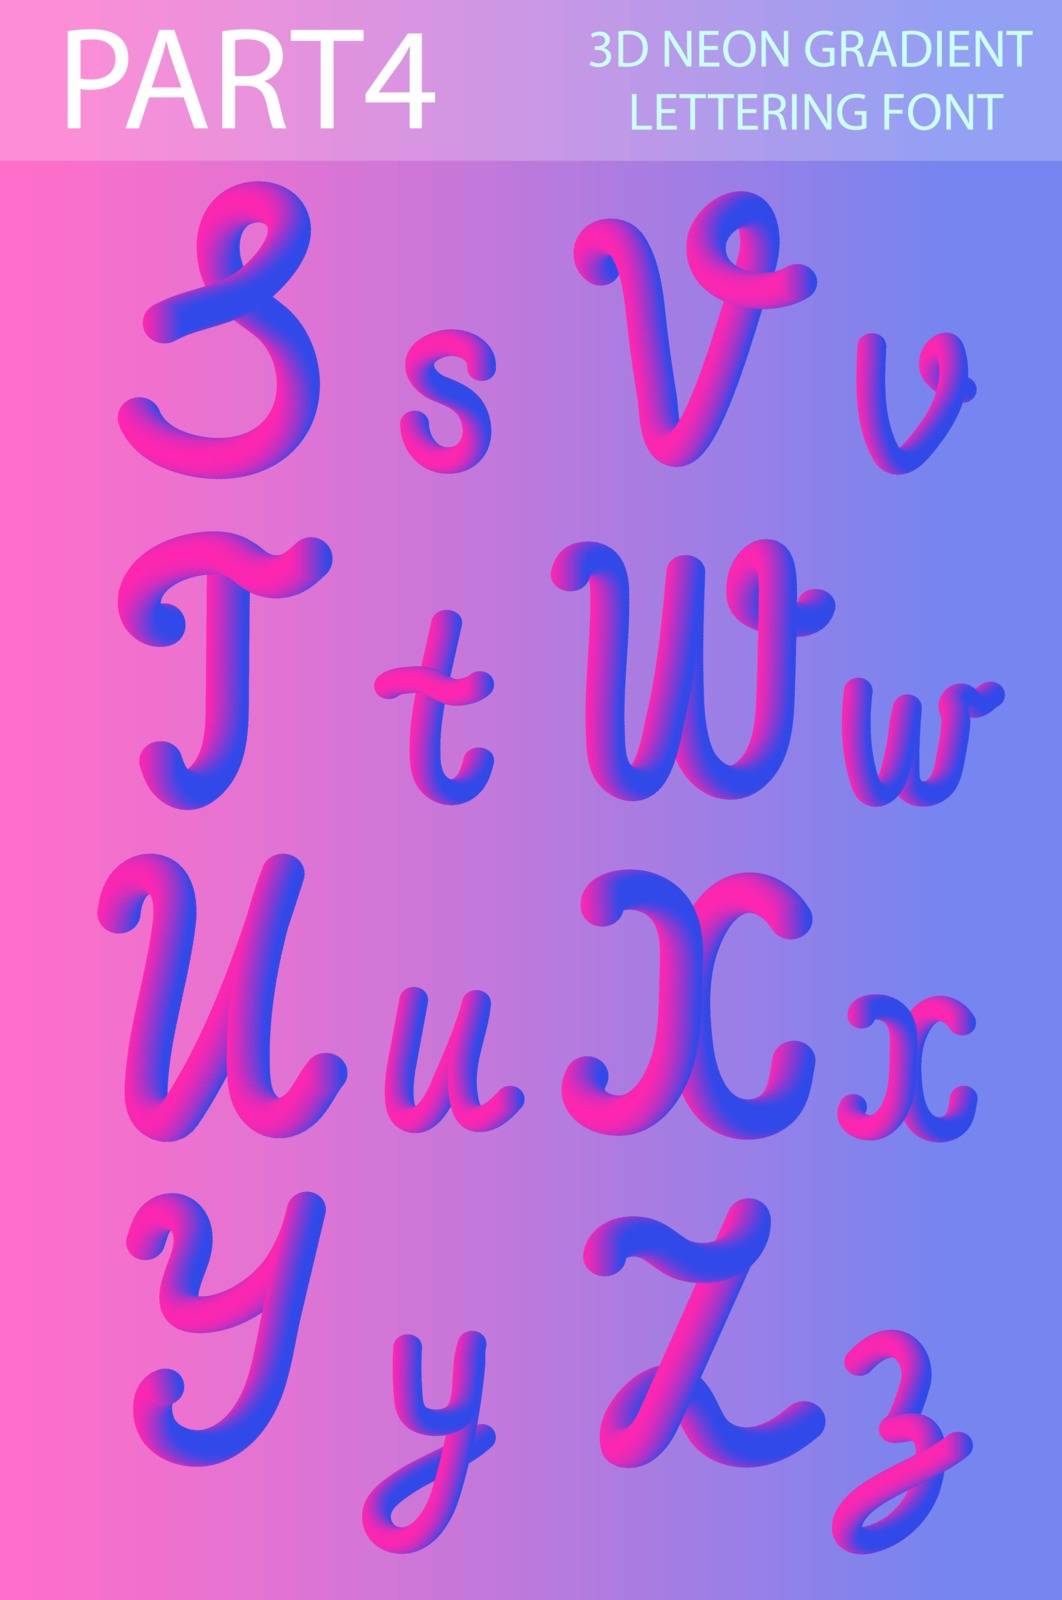 Neon 3D Typeset with Rounded Shapes. Tube Hand-Drawn Lettering. Font Set of Painted Letters. Night Glow Effect or liquid. Trendy alphabet Latin letters from A to Z. Vector illustration